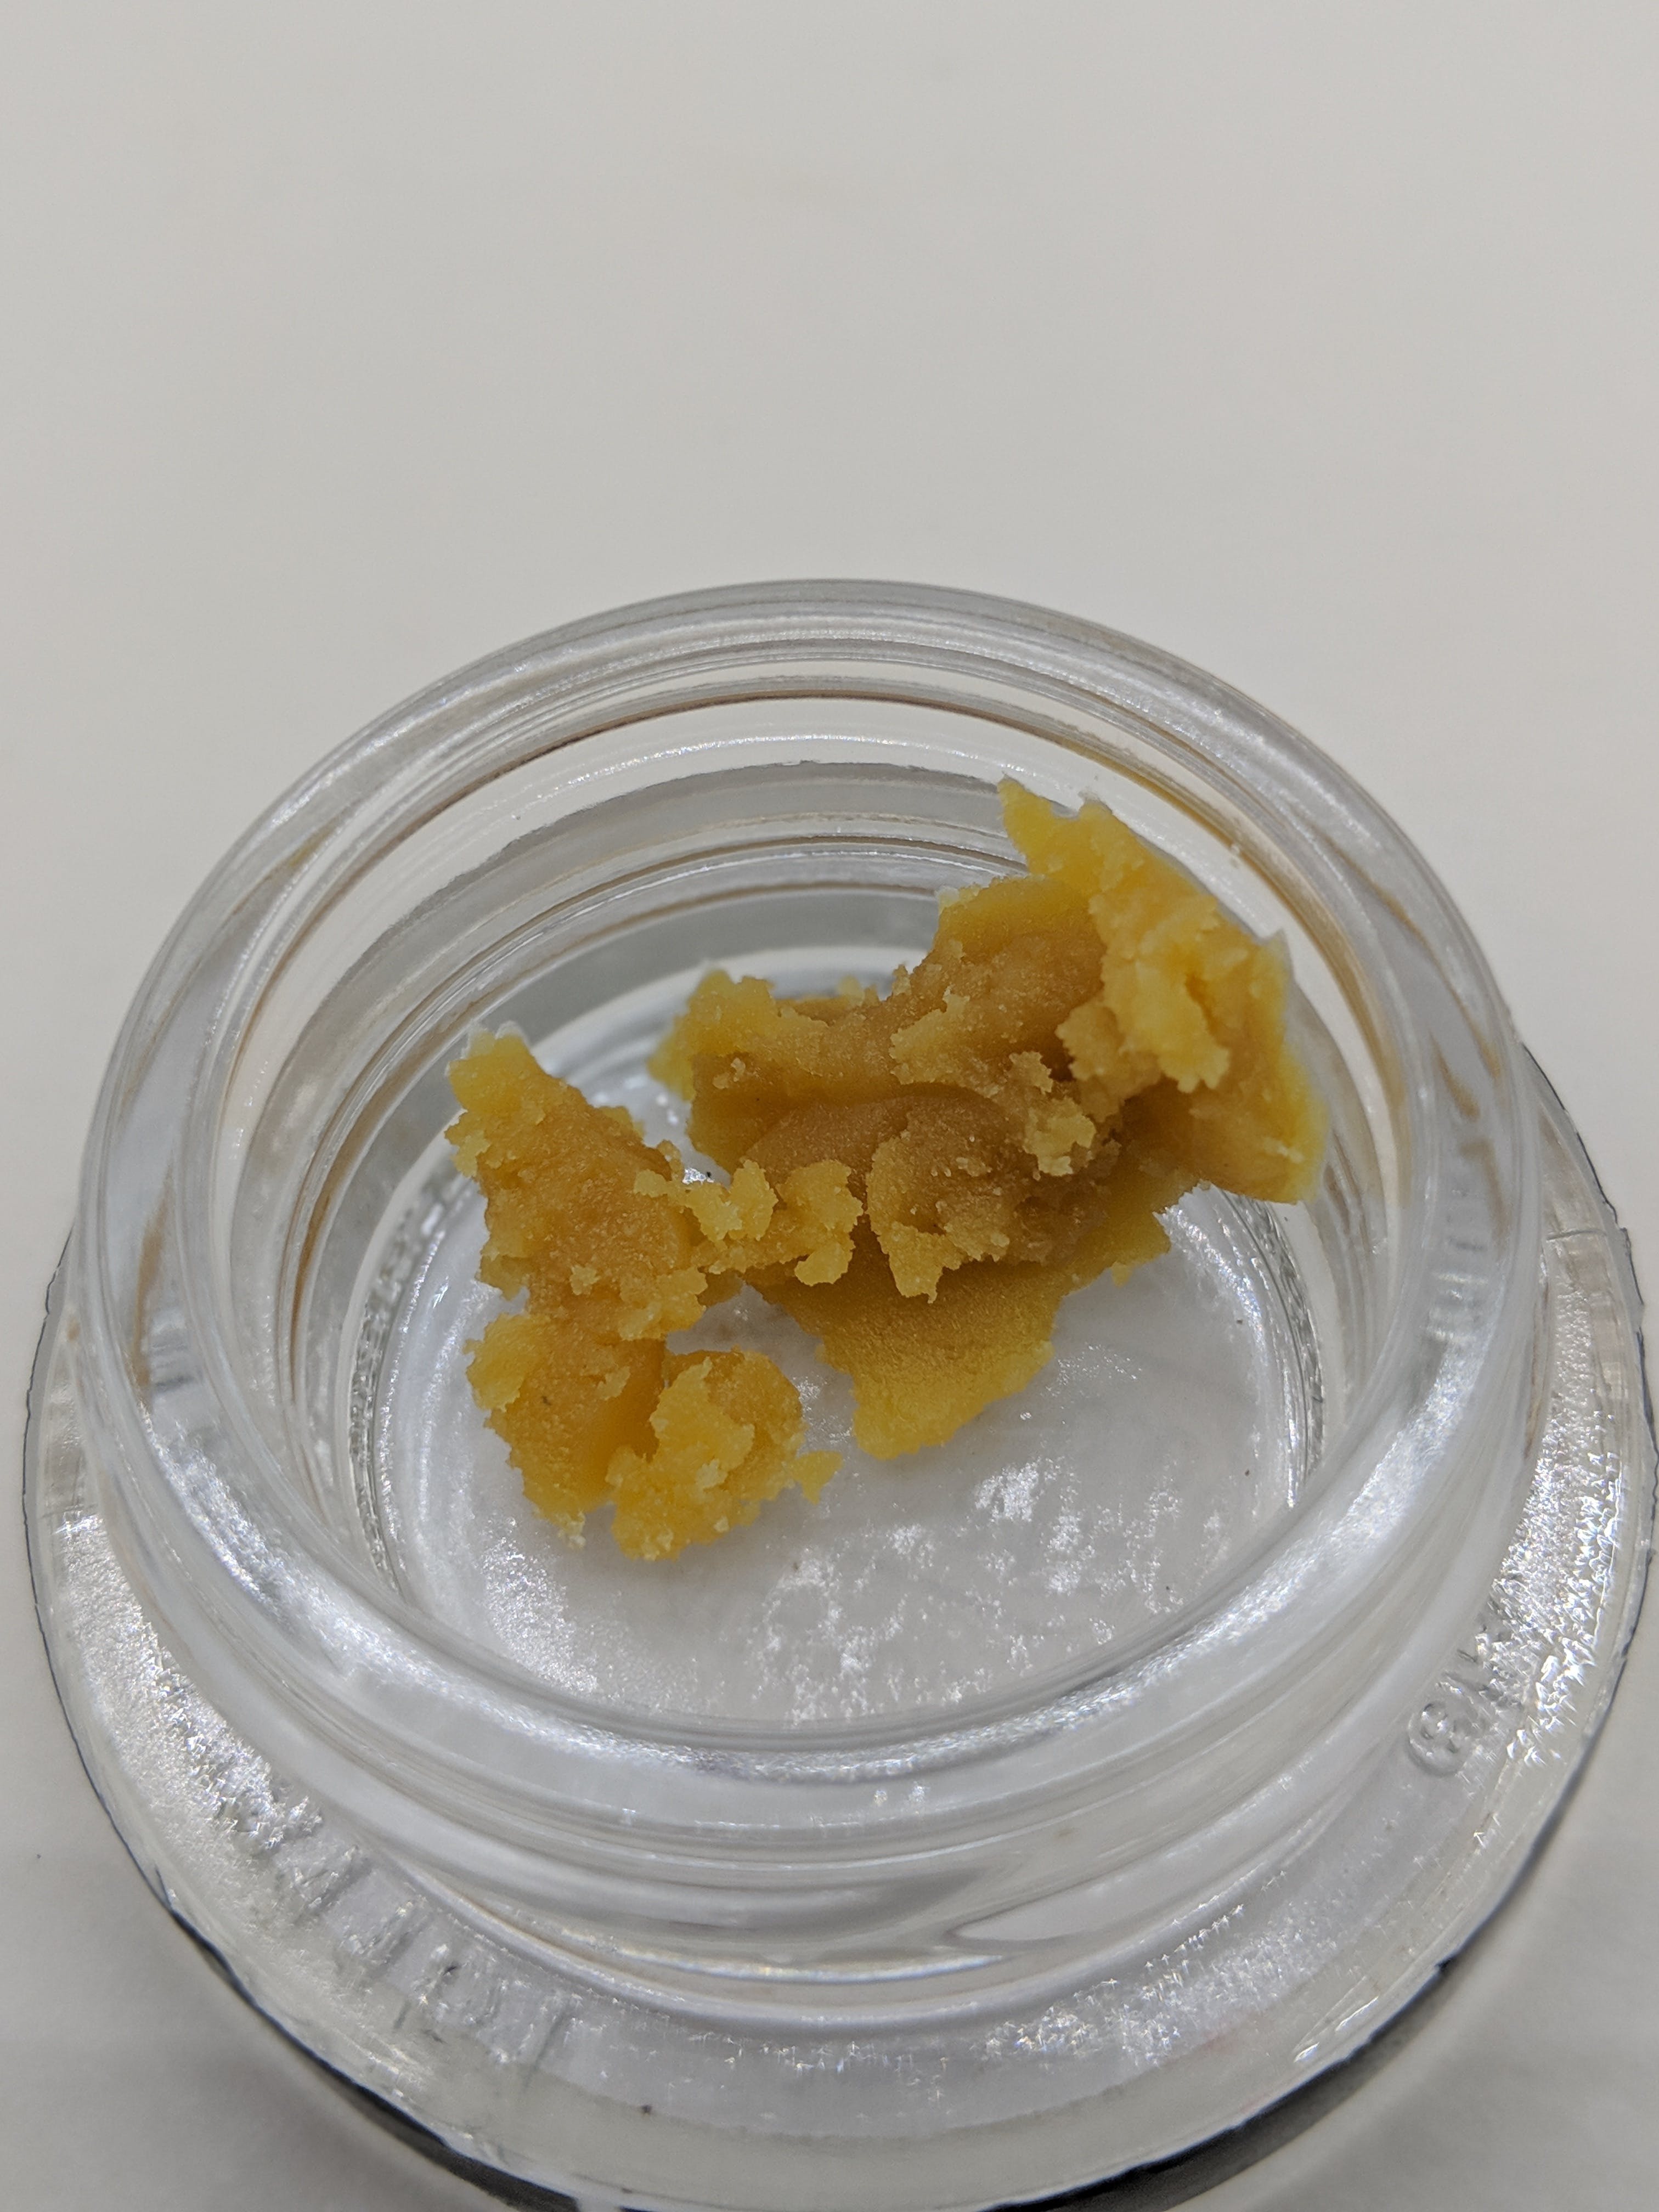 concentrate-apex-extracts-black-koffee-live-badder